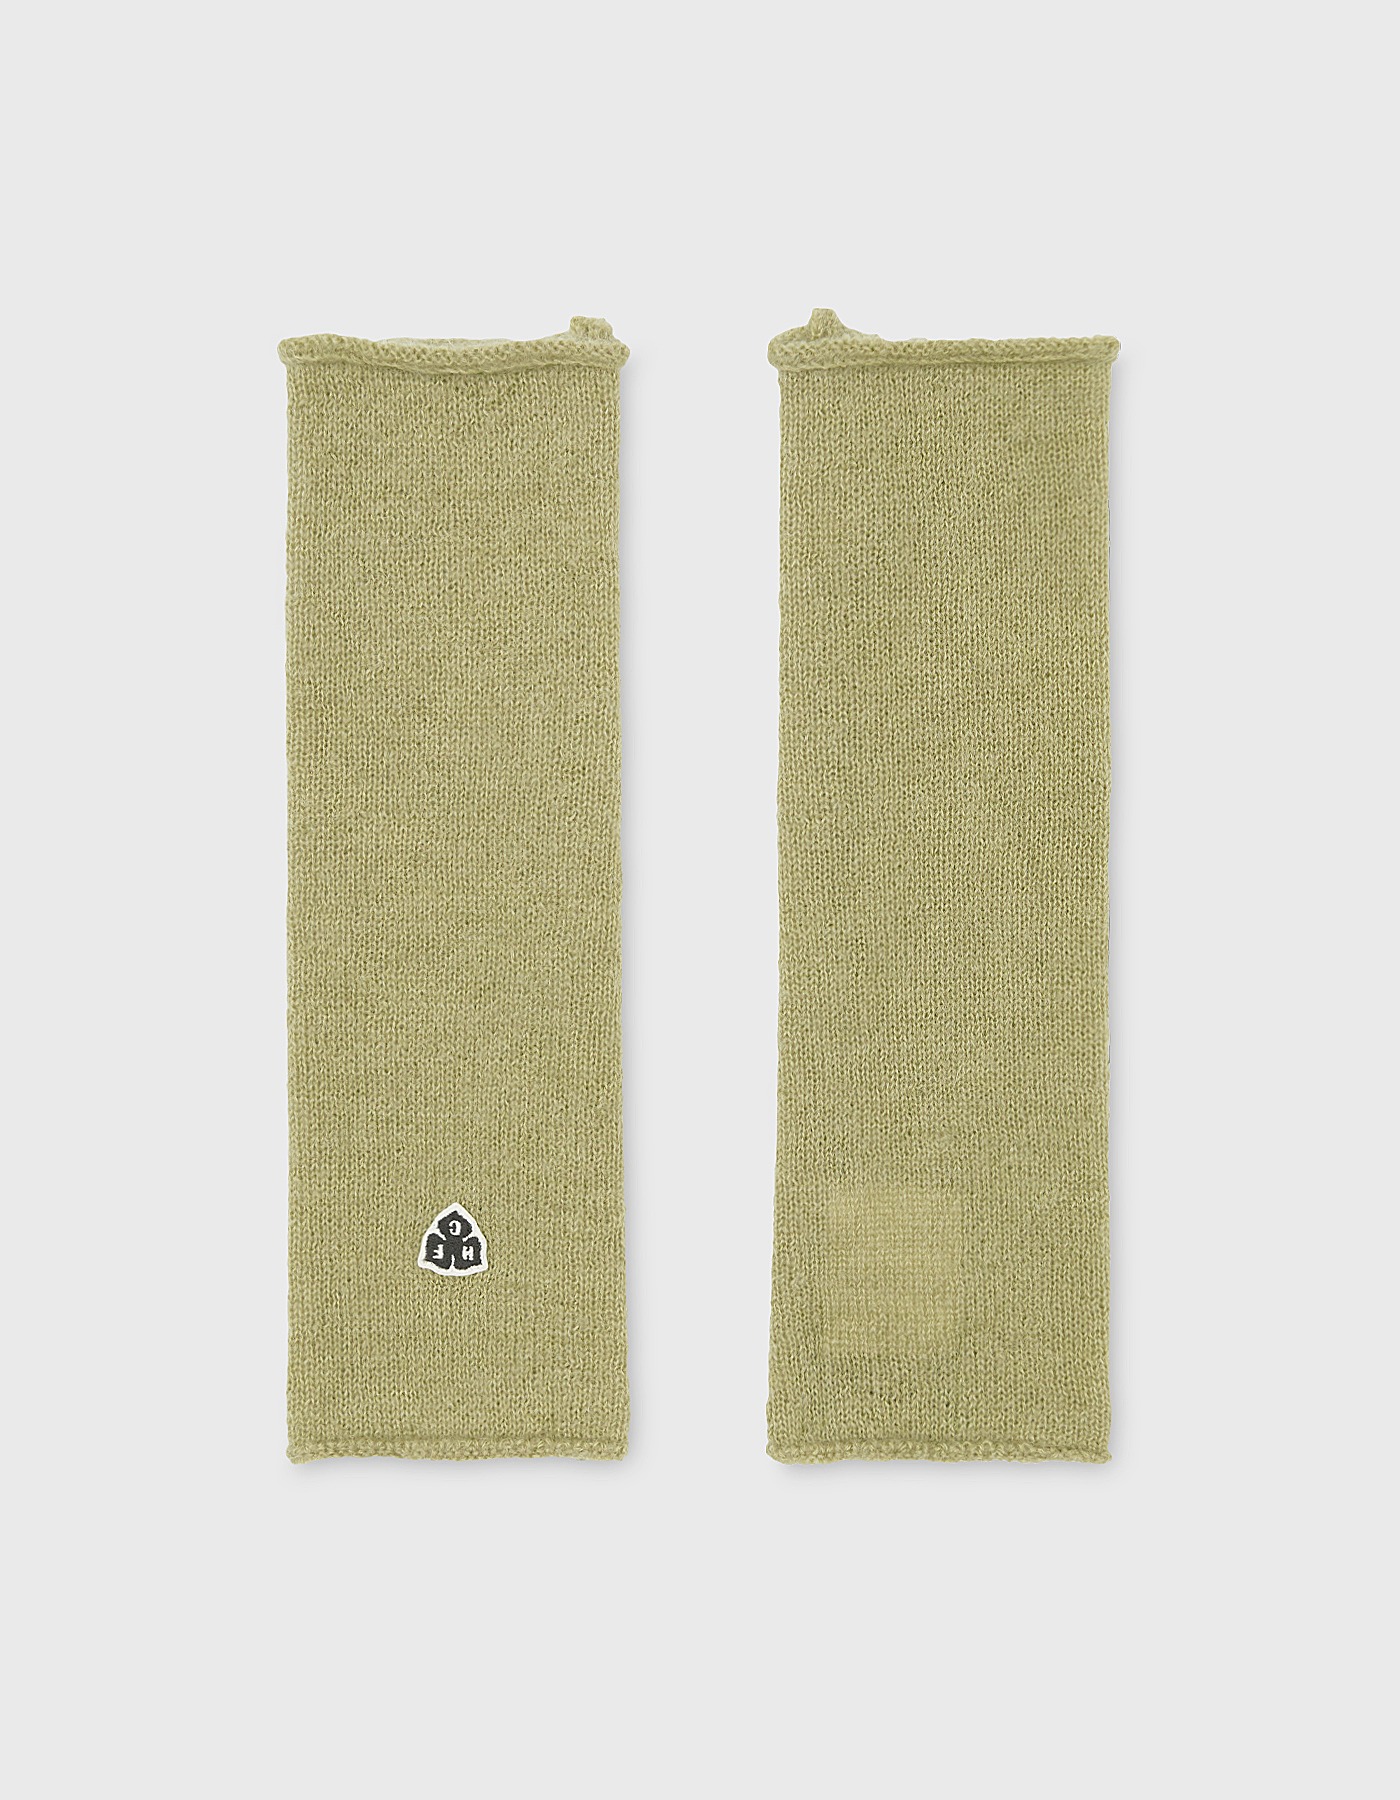 MOHAIR ARM WARMERS / Olive Green